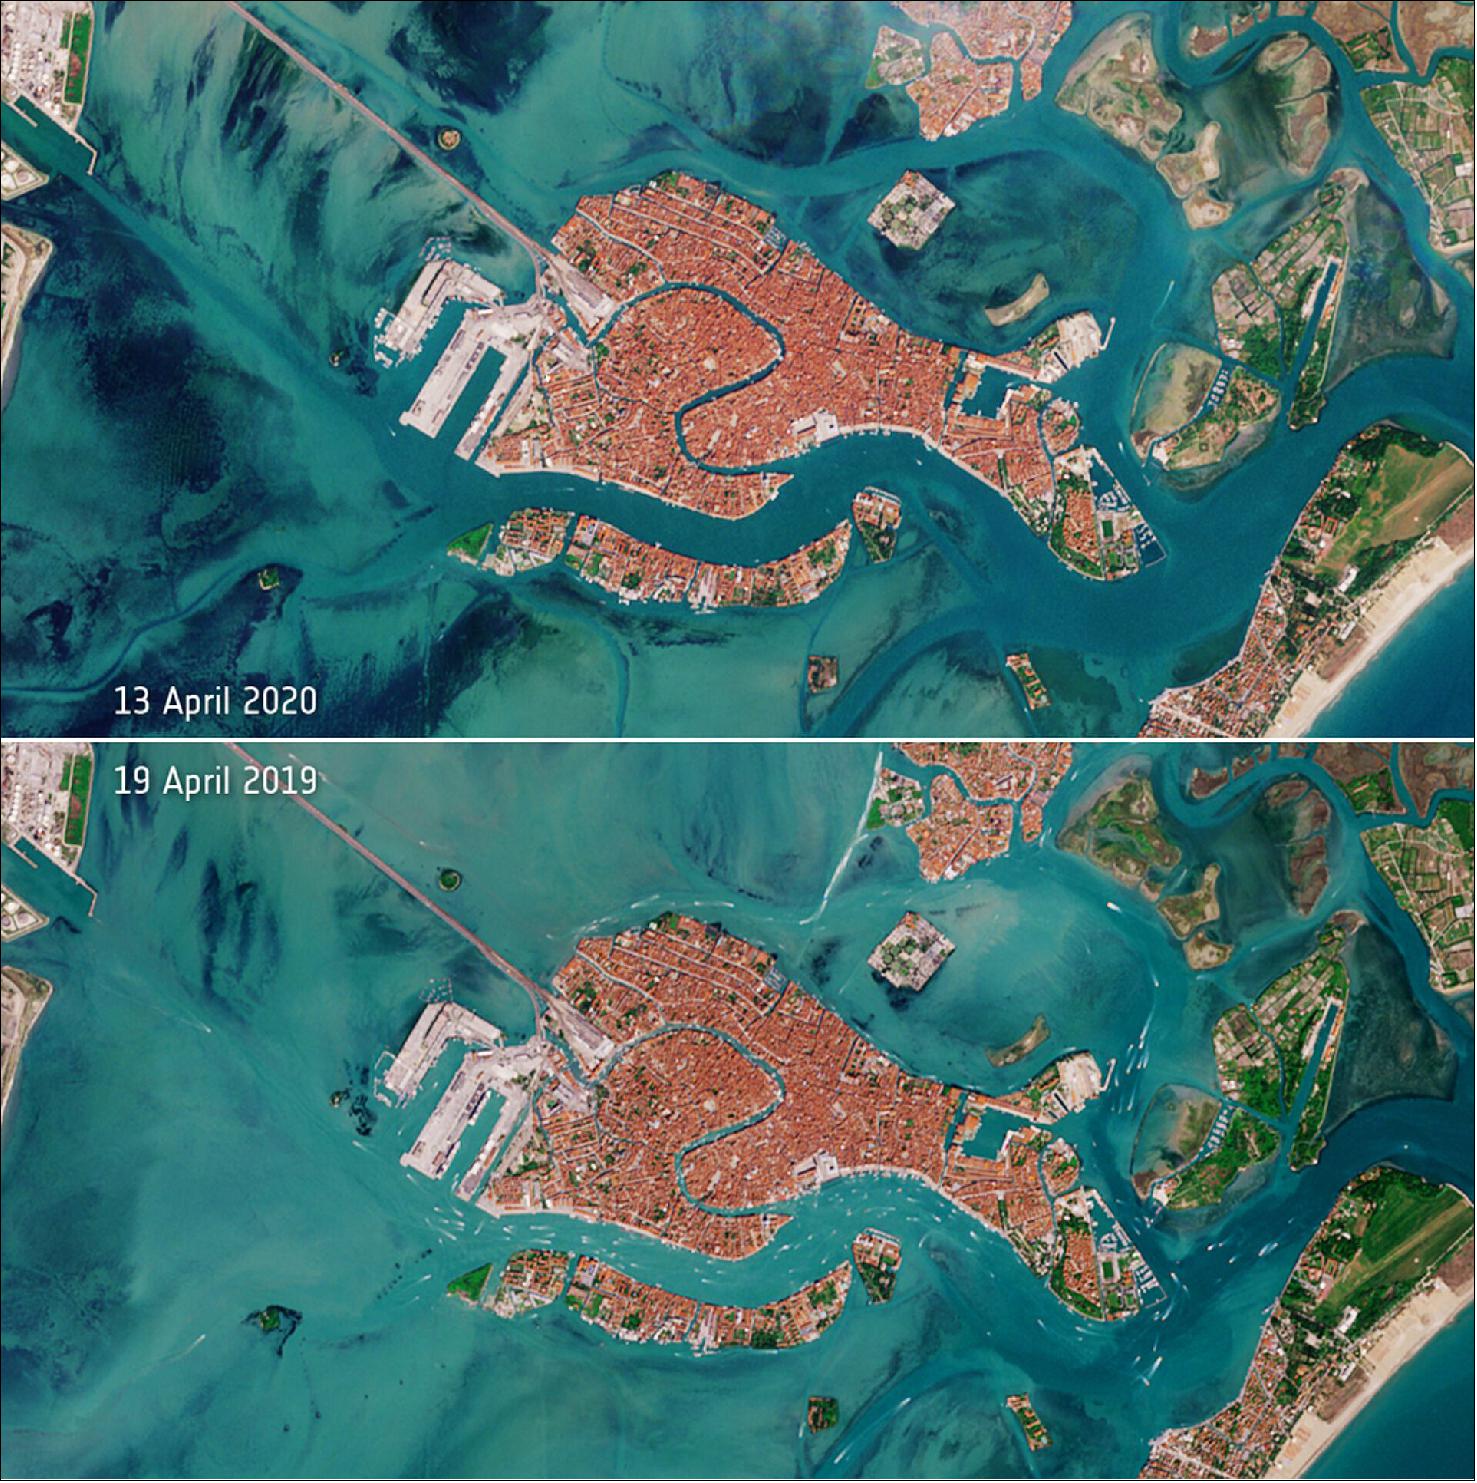 Figure 47: These images show one of the effects of the locked-down city of Venice, in northern Italy. The top image, captured 13 April 2020, shows a distinct lack of boat traffic compared to the image from 19 April 2019 (image credit: ESA, the images contain modified Copernicus Sentinel data (2019-20), processed by ESA, CC BY-SA 3.0 IGO)